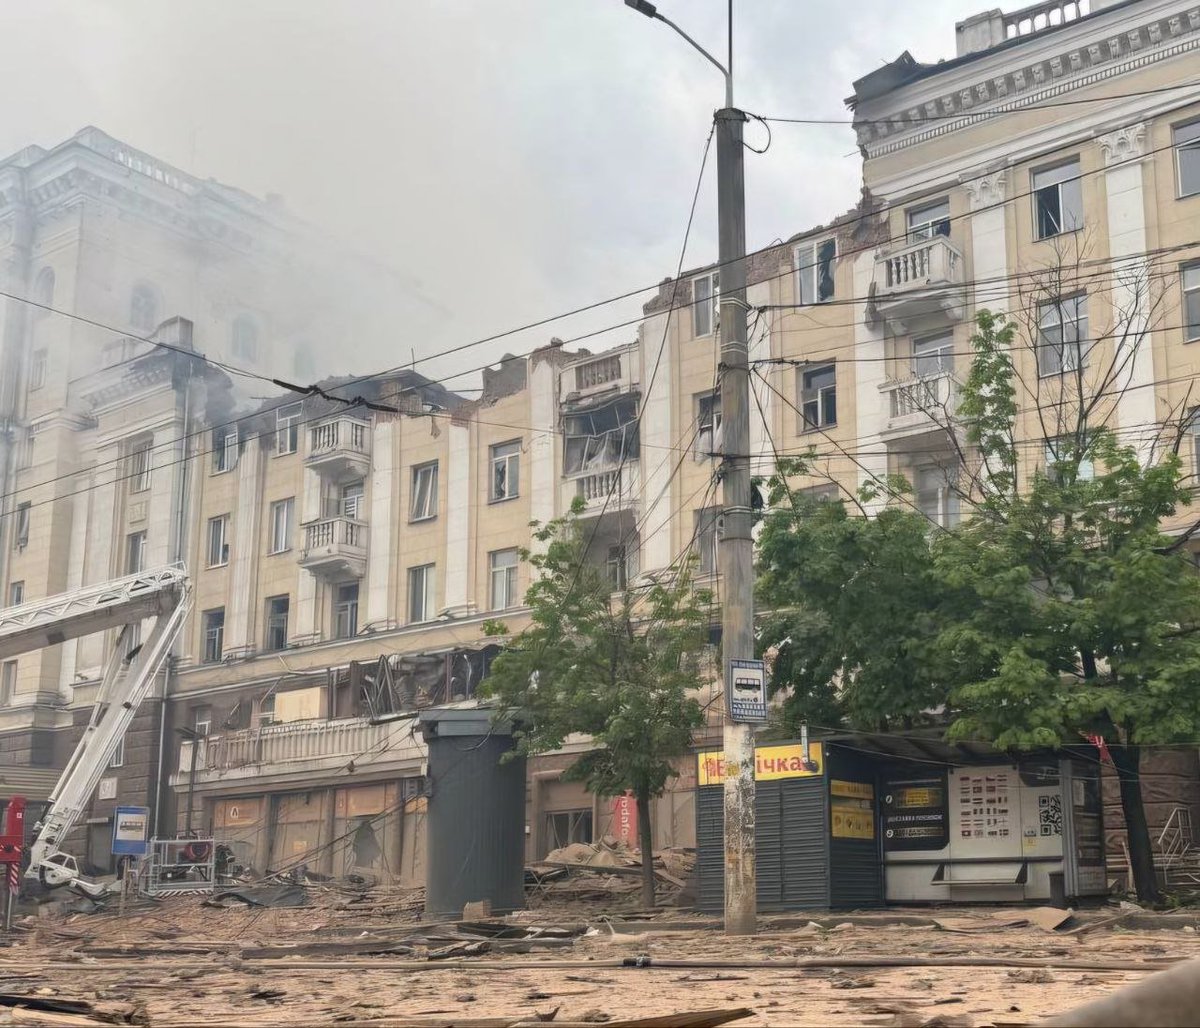 Russian terrorists launched a rocket attack on the Dnipro city, killing 2 people, 15 were injured, 6 more people died in Synelnikovo, among them two children.

#Ukraine #RussiaIsATerroristState #RussianWarCrimes #UkraineUnderAttack #StopRussianAggression #StopRussia #TerroRussia